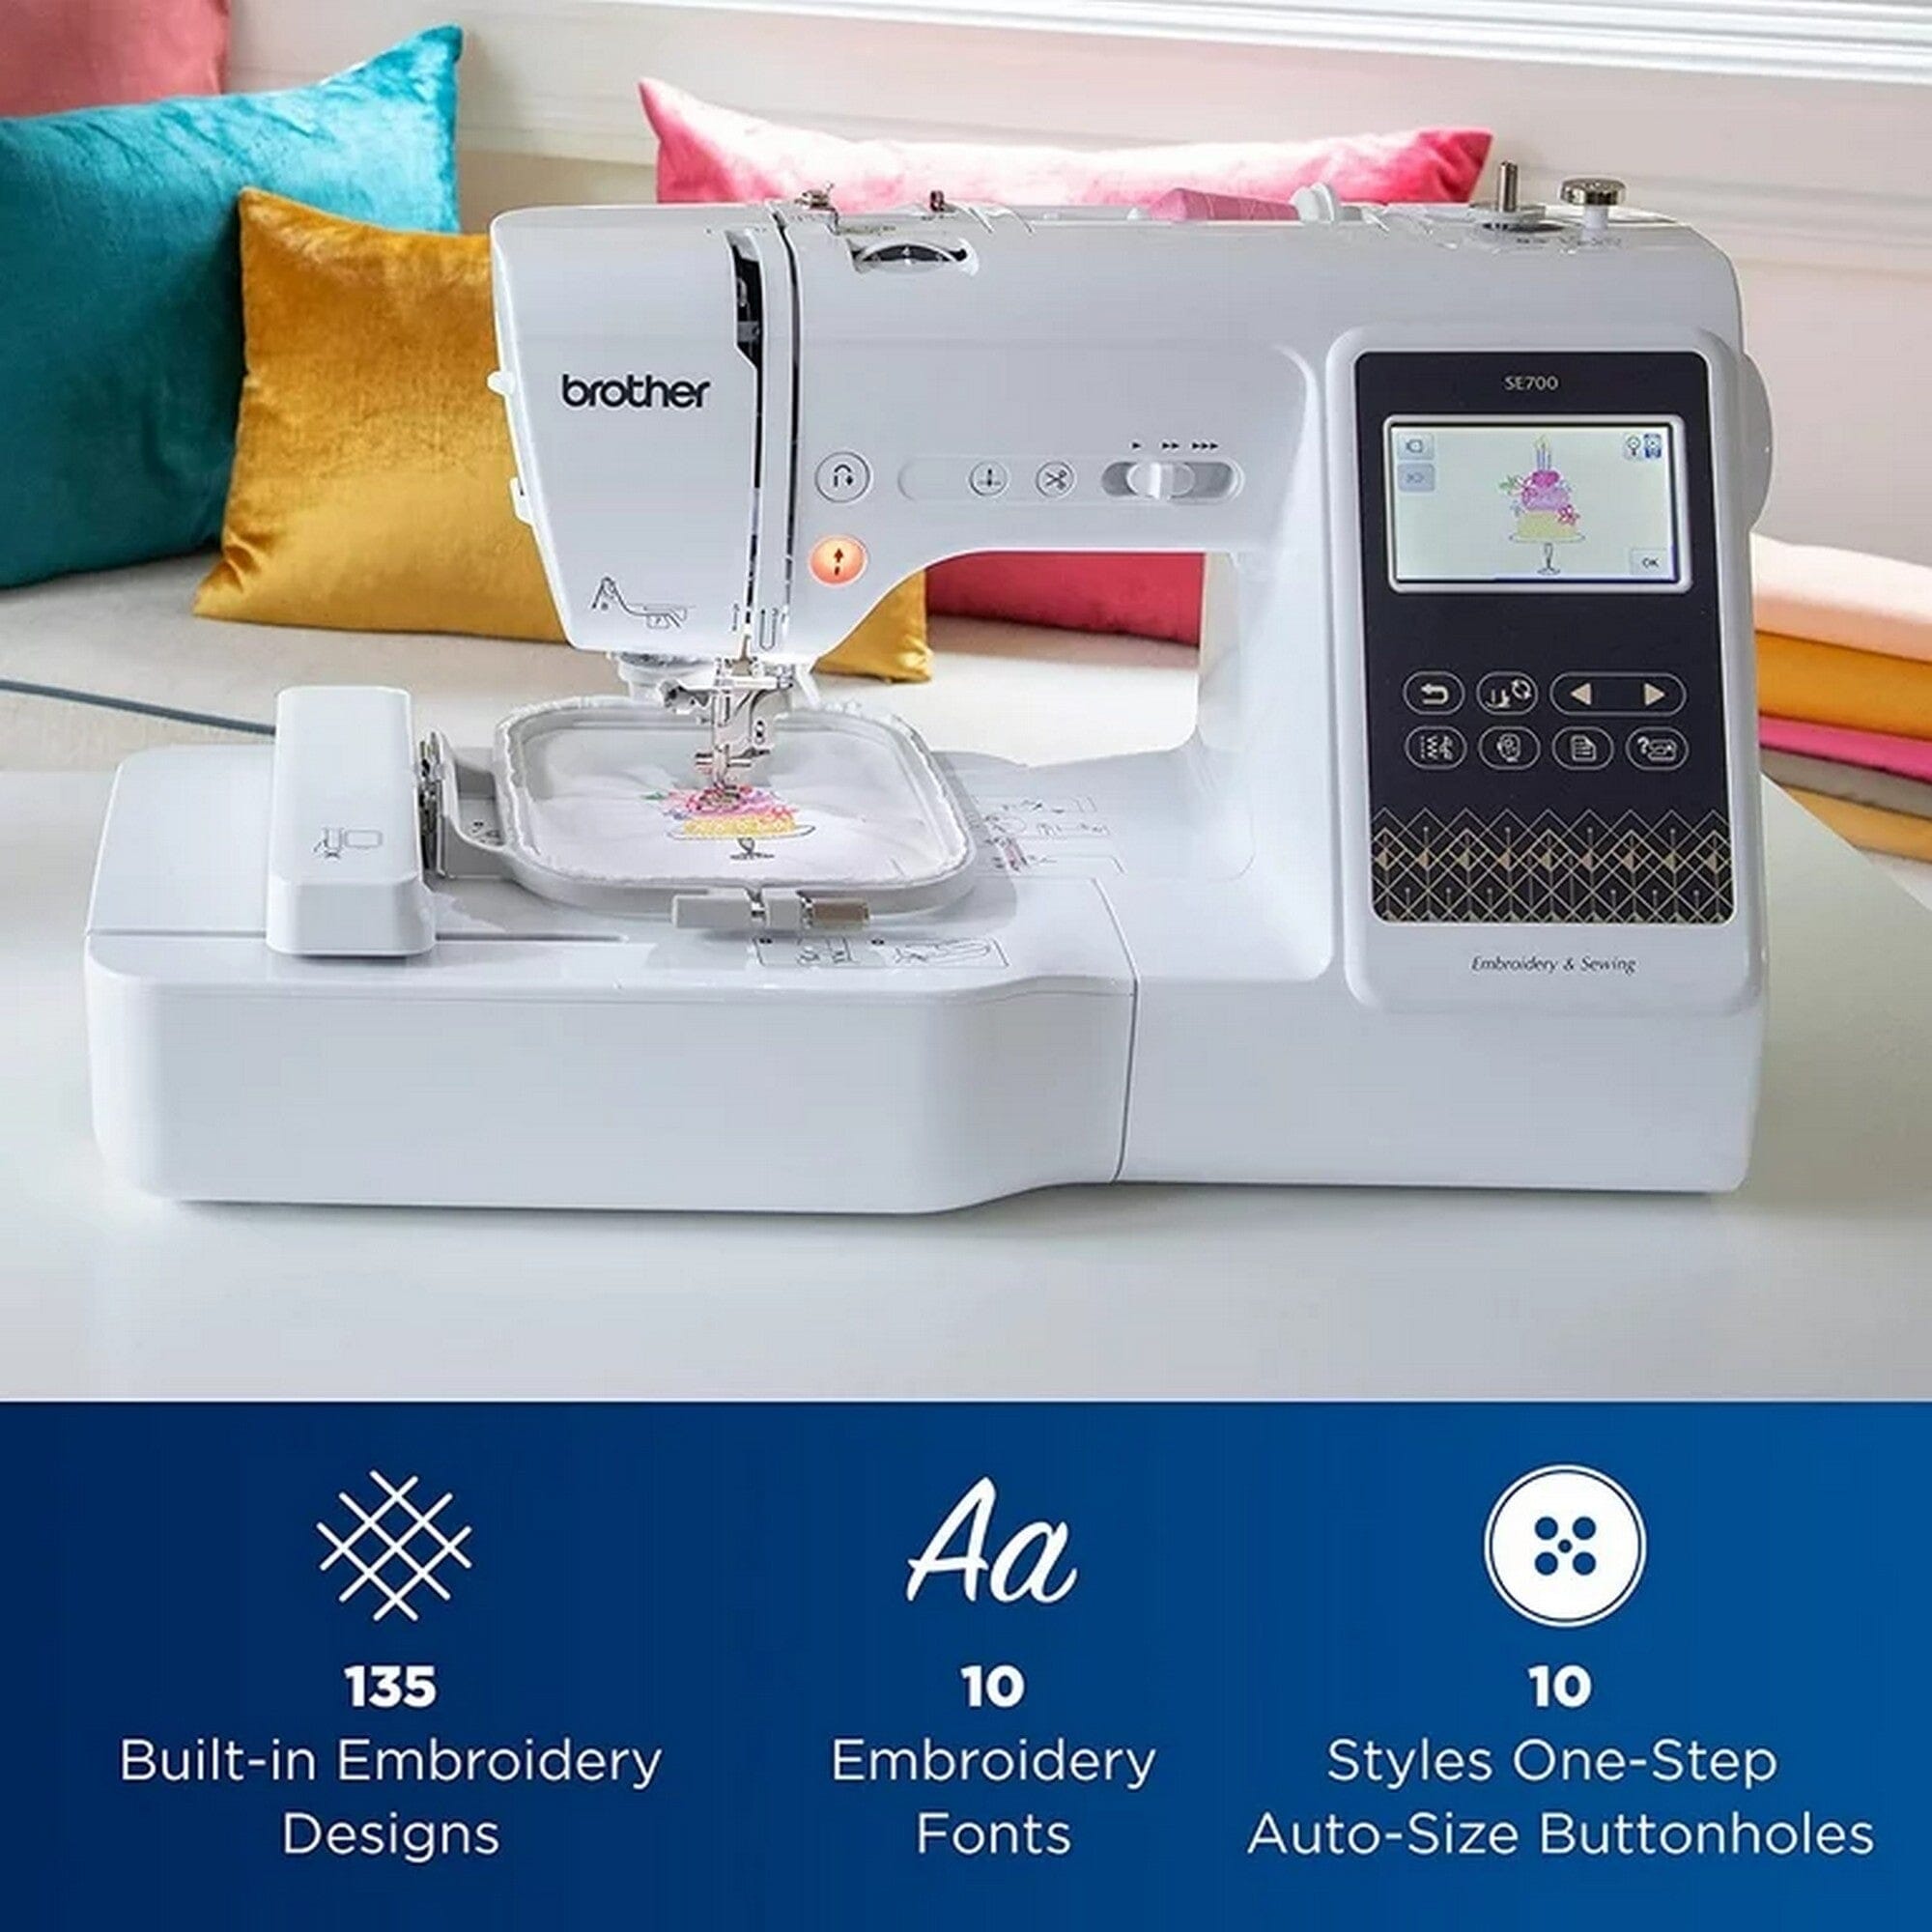 Brother SE700 Elite Sewing and Embroidery Machine with Sewing Bundle